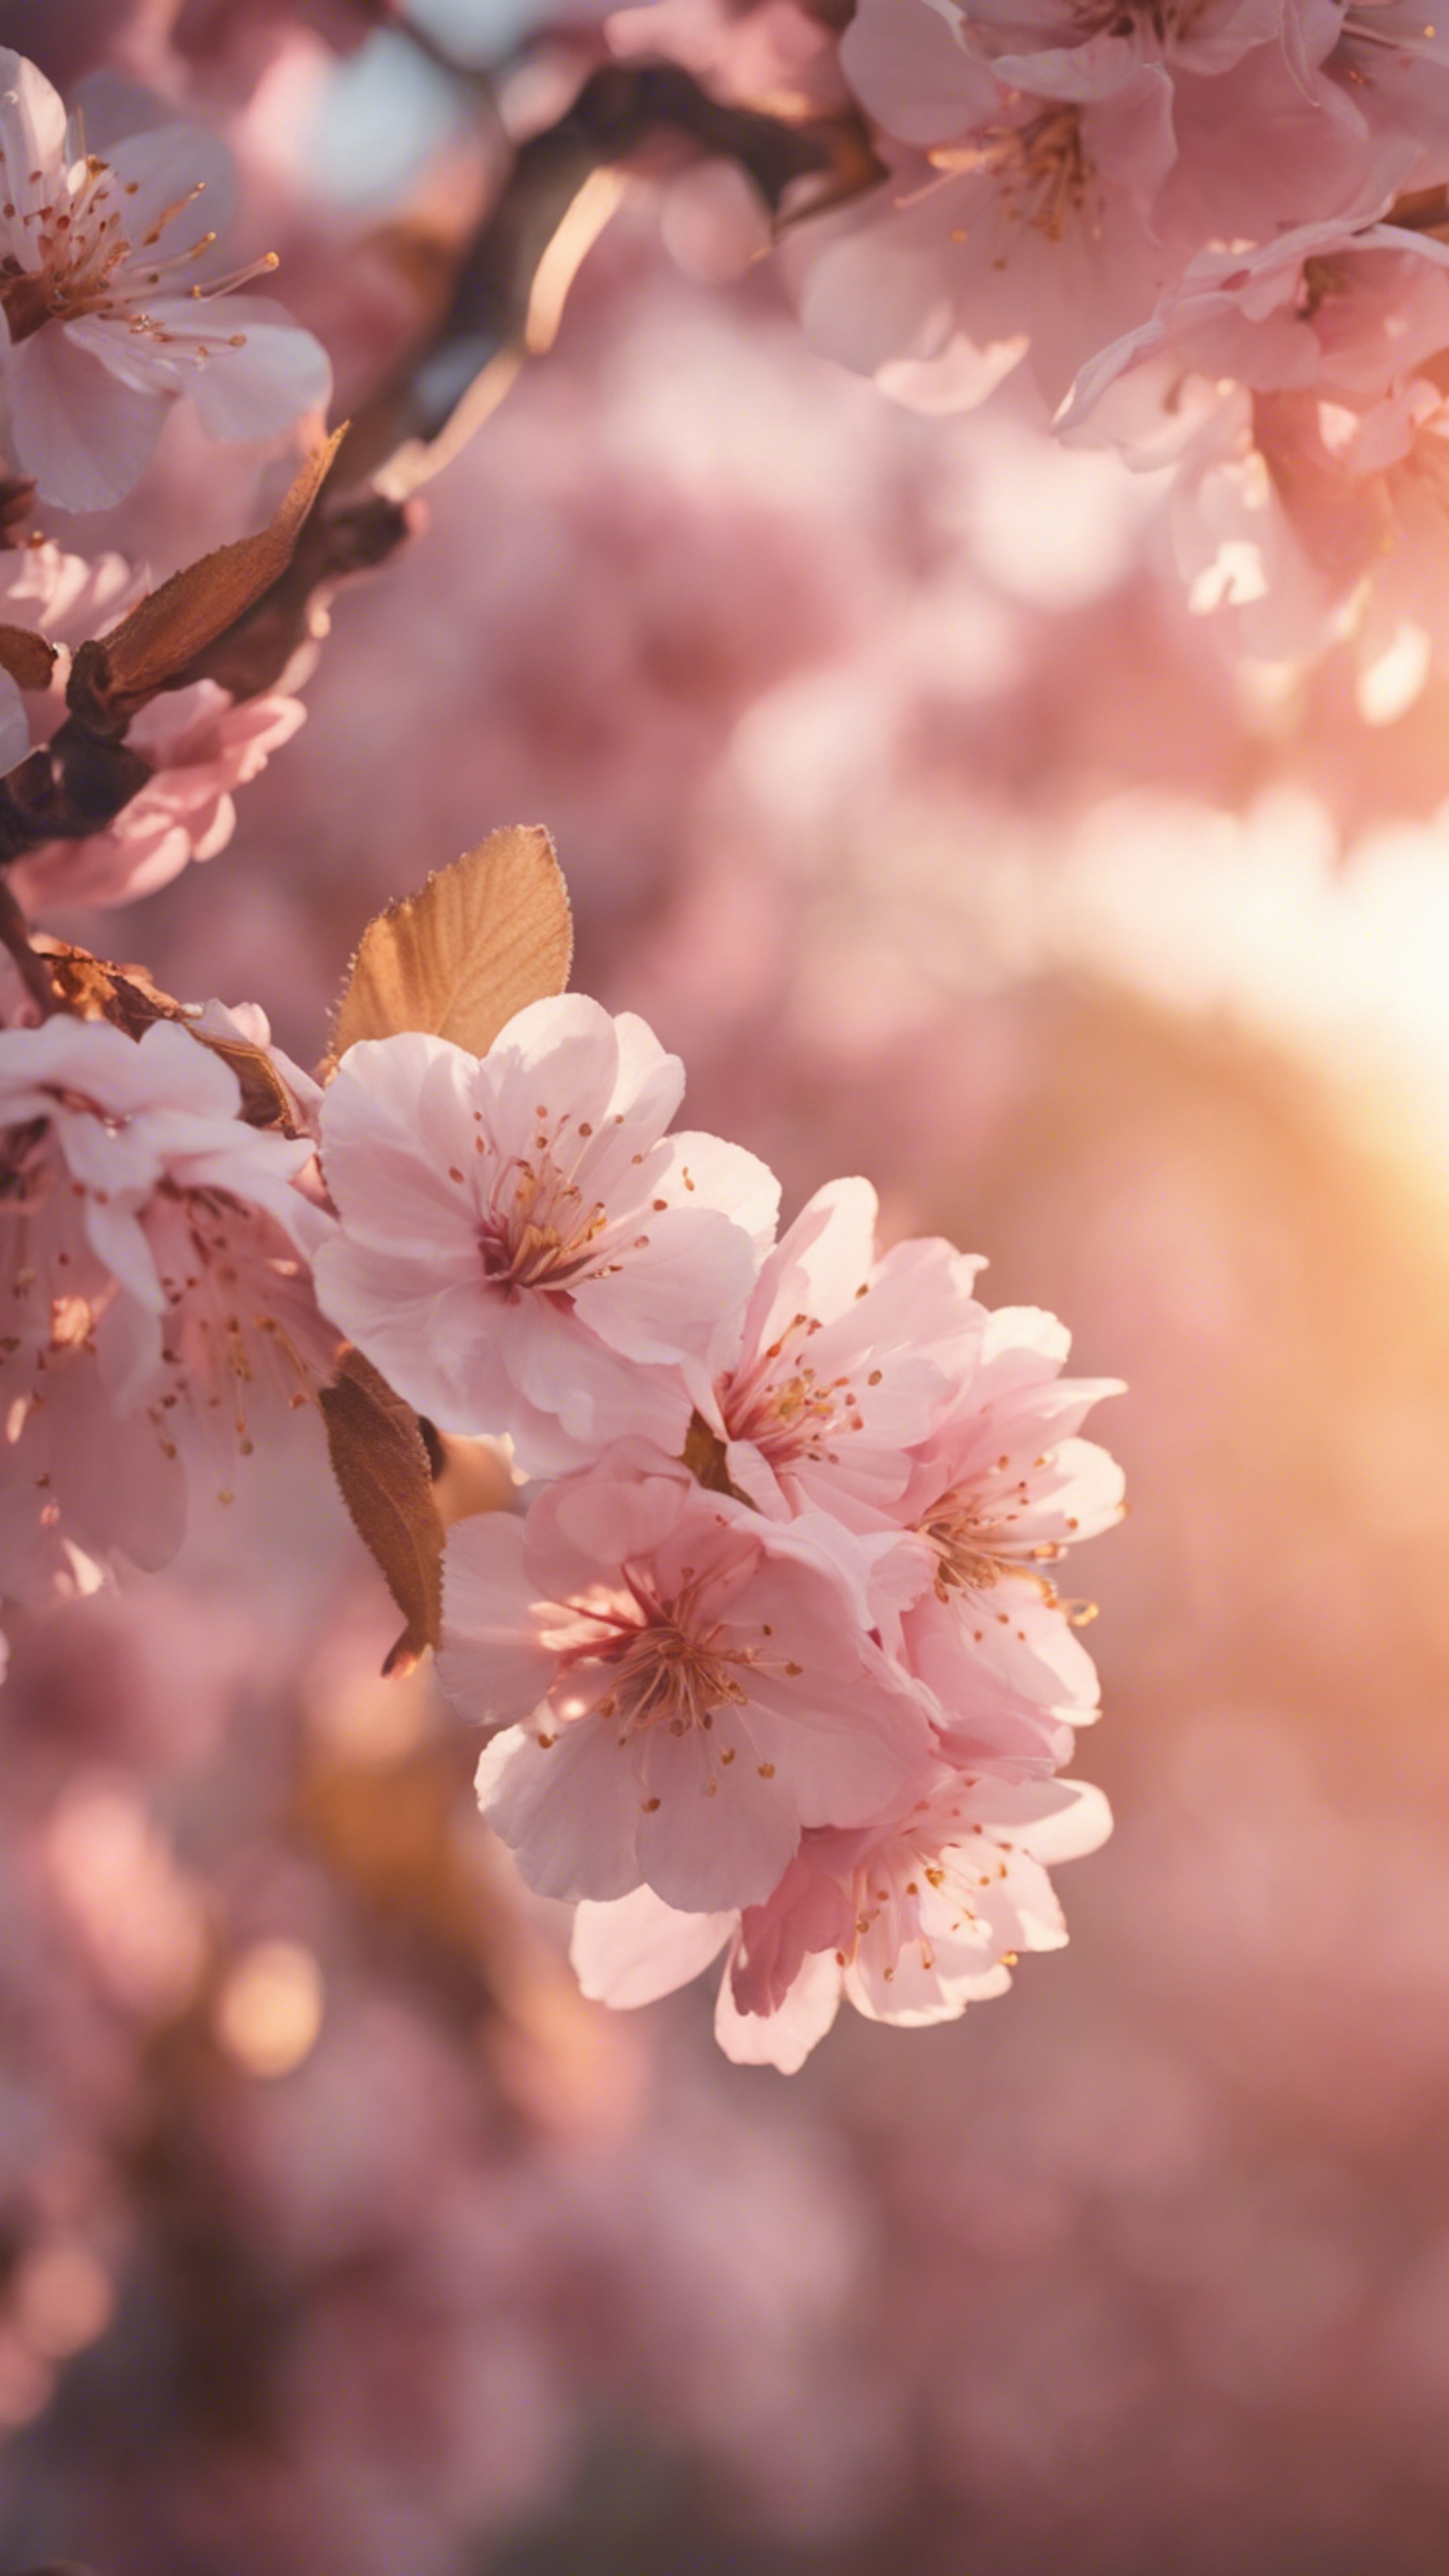 A delicate pink cherry blossom tree with gold leaves against a soft sunset. Обои[63878b5c392143fbba4e]